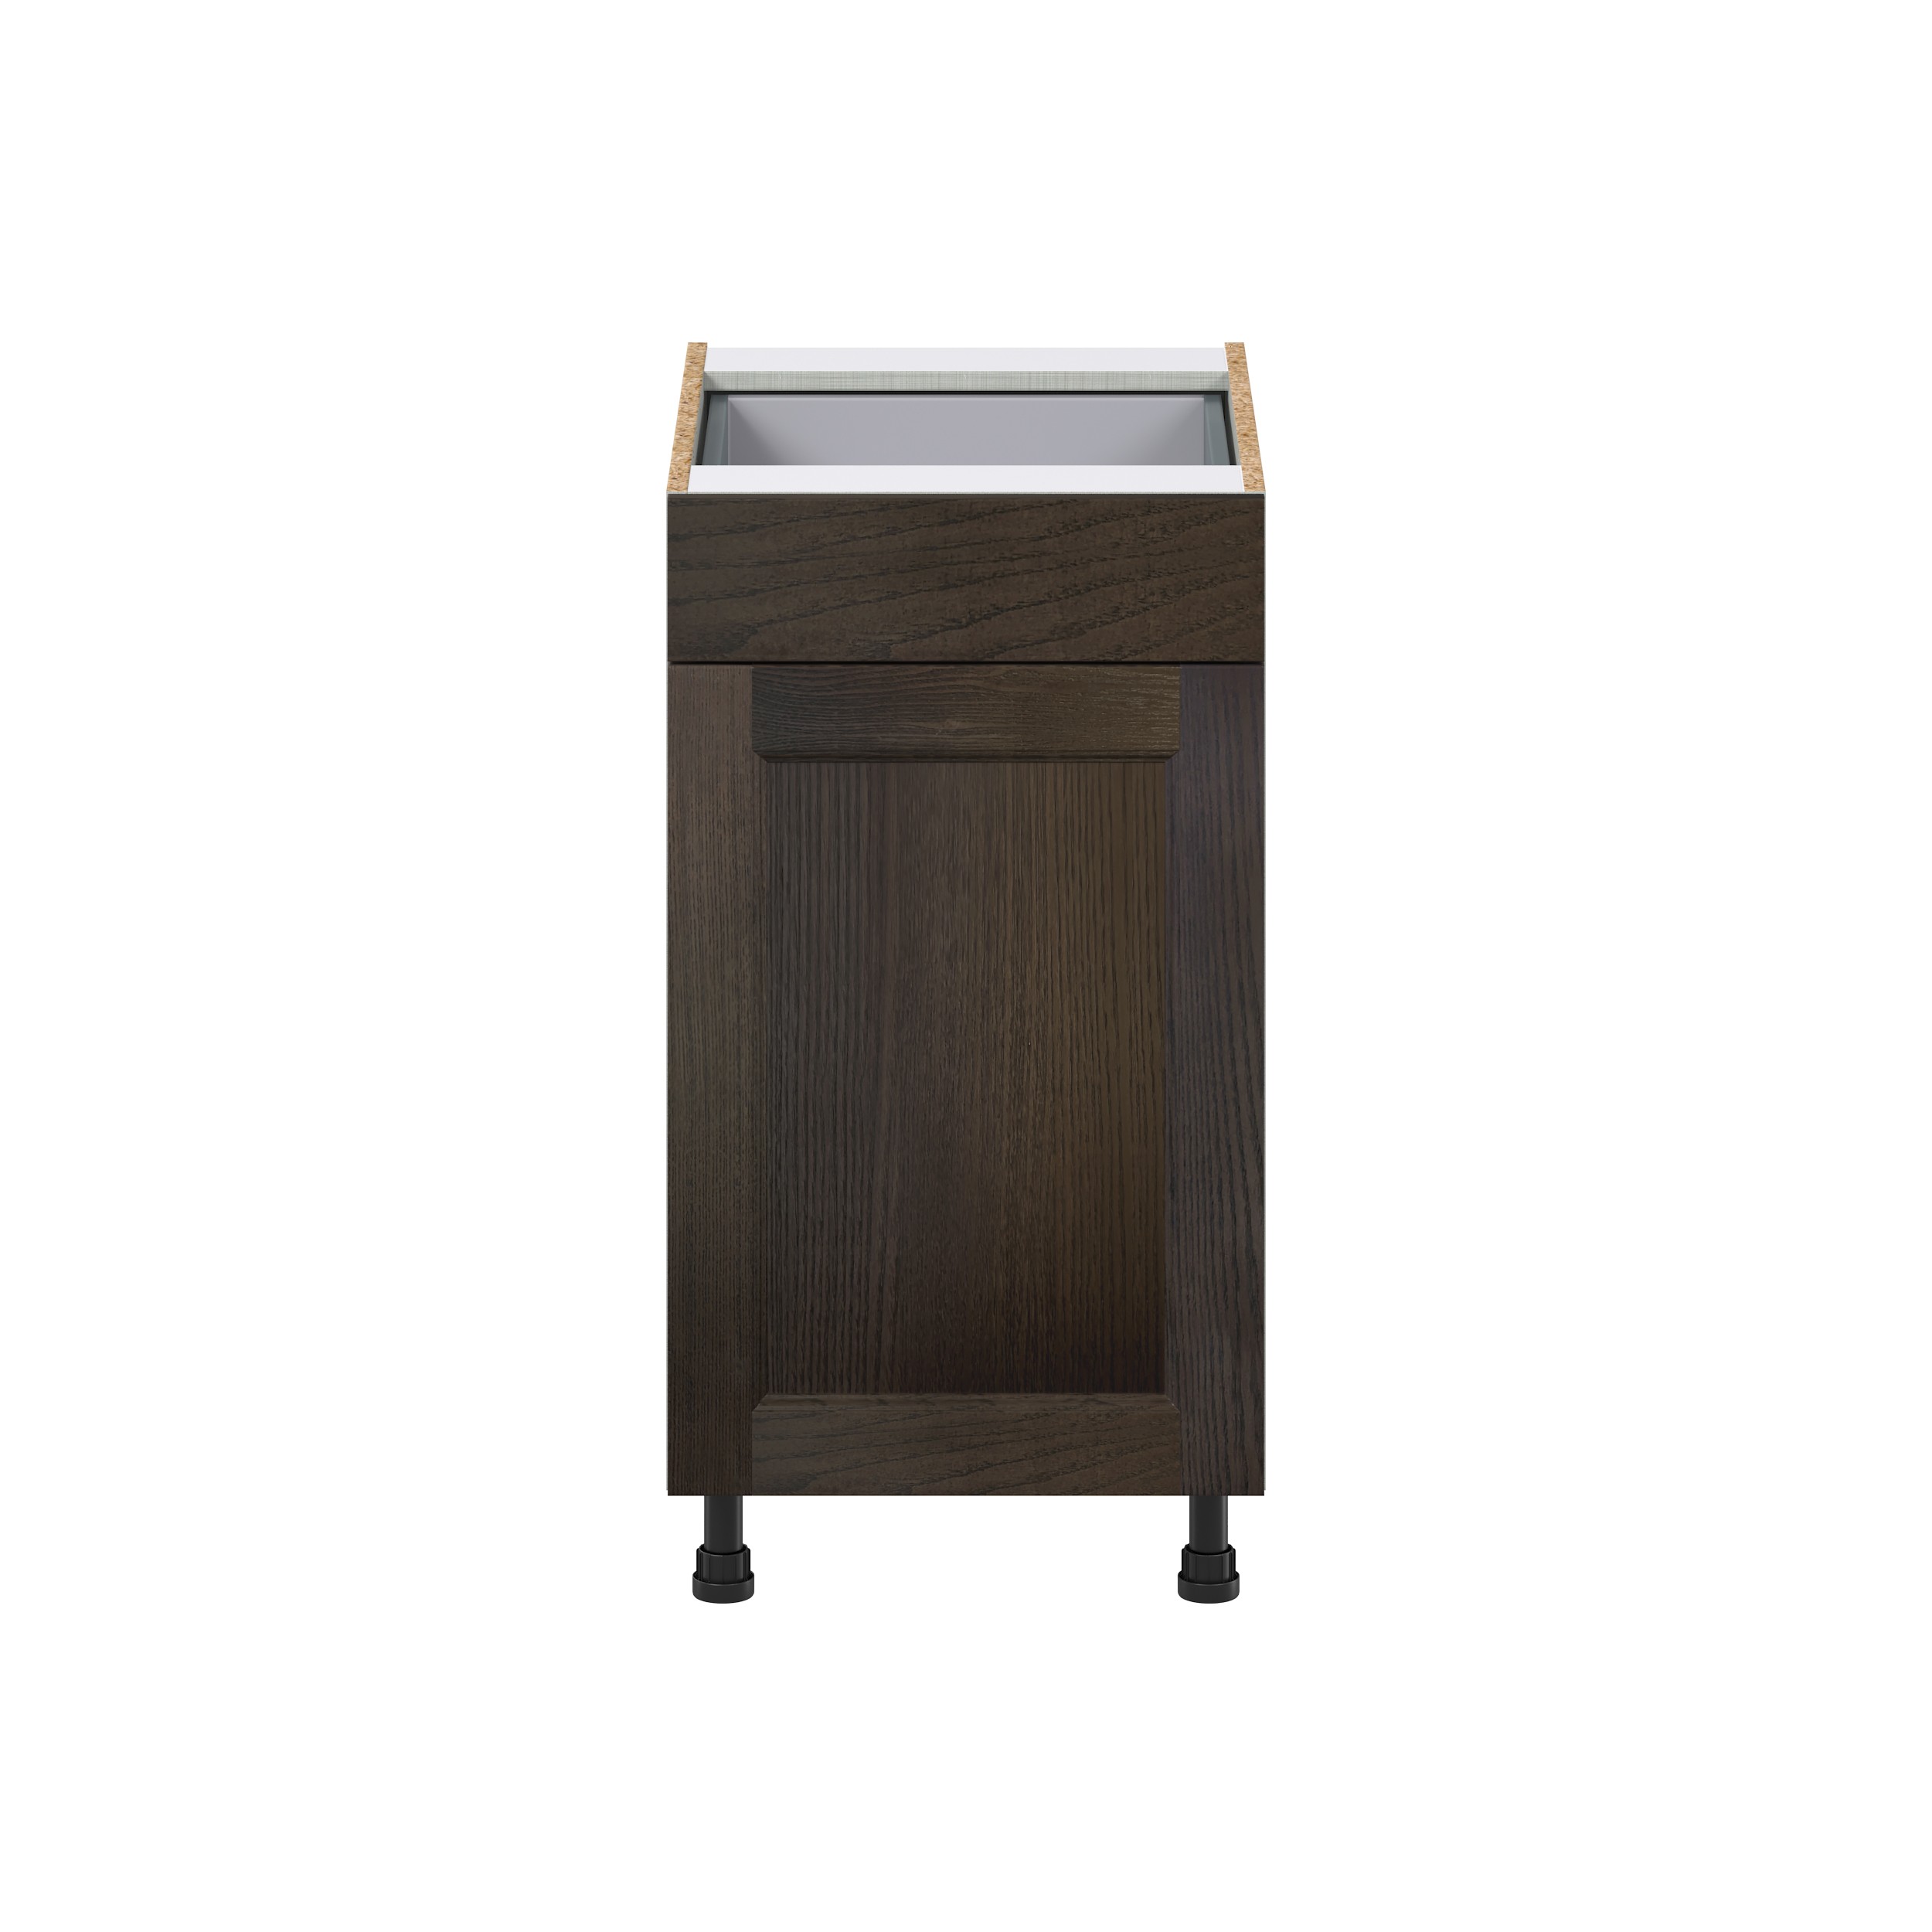 Summerina Chestnut Solid Wood Recessed Assembled with 1 Drawer and 2 Pull Out Waste Bin Kitchen Cabinet (18 in. W x 34.5 in. H x 24 in. D)